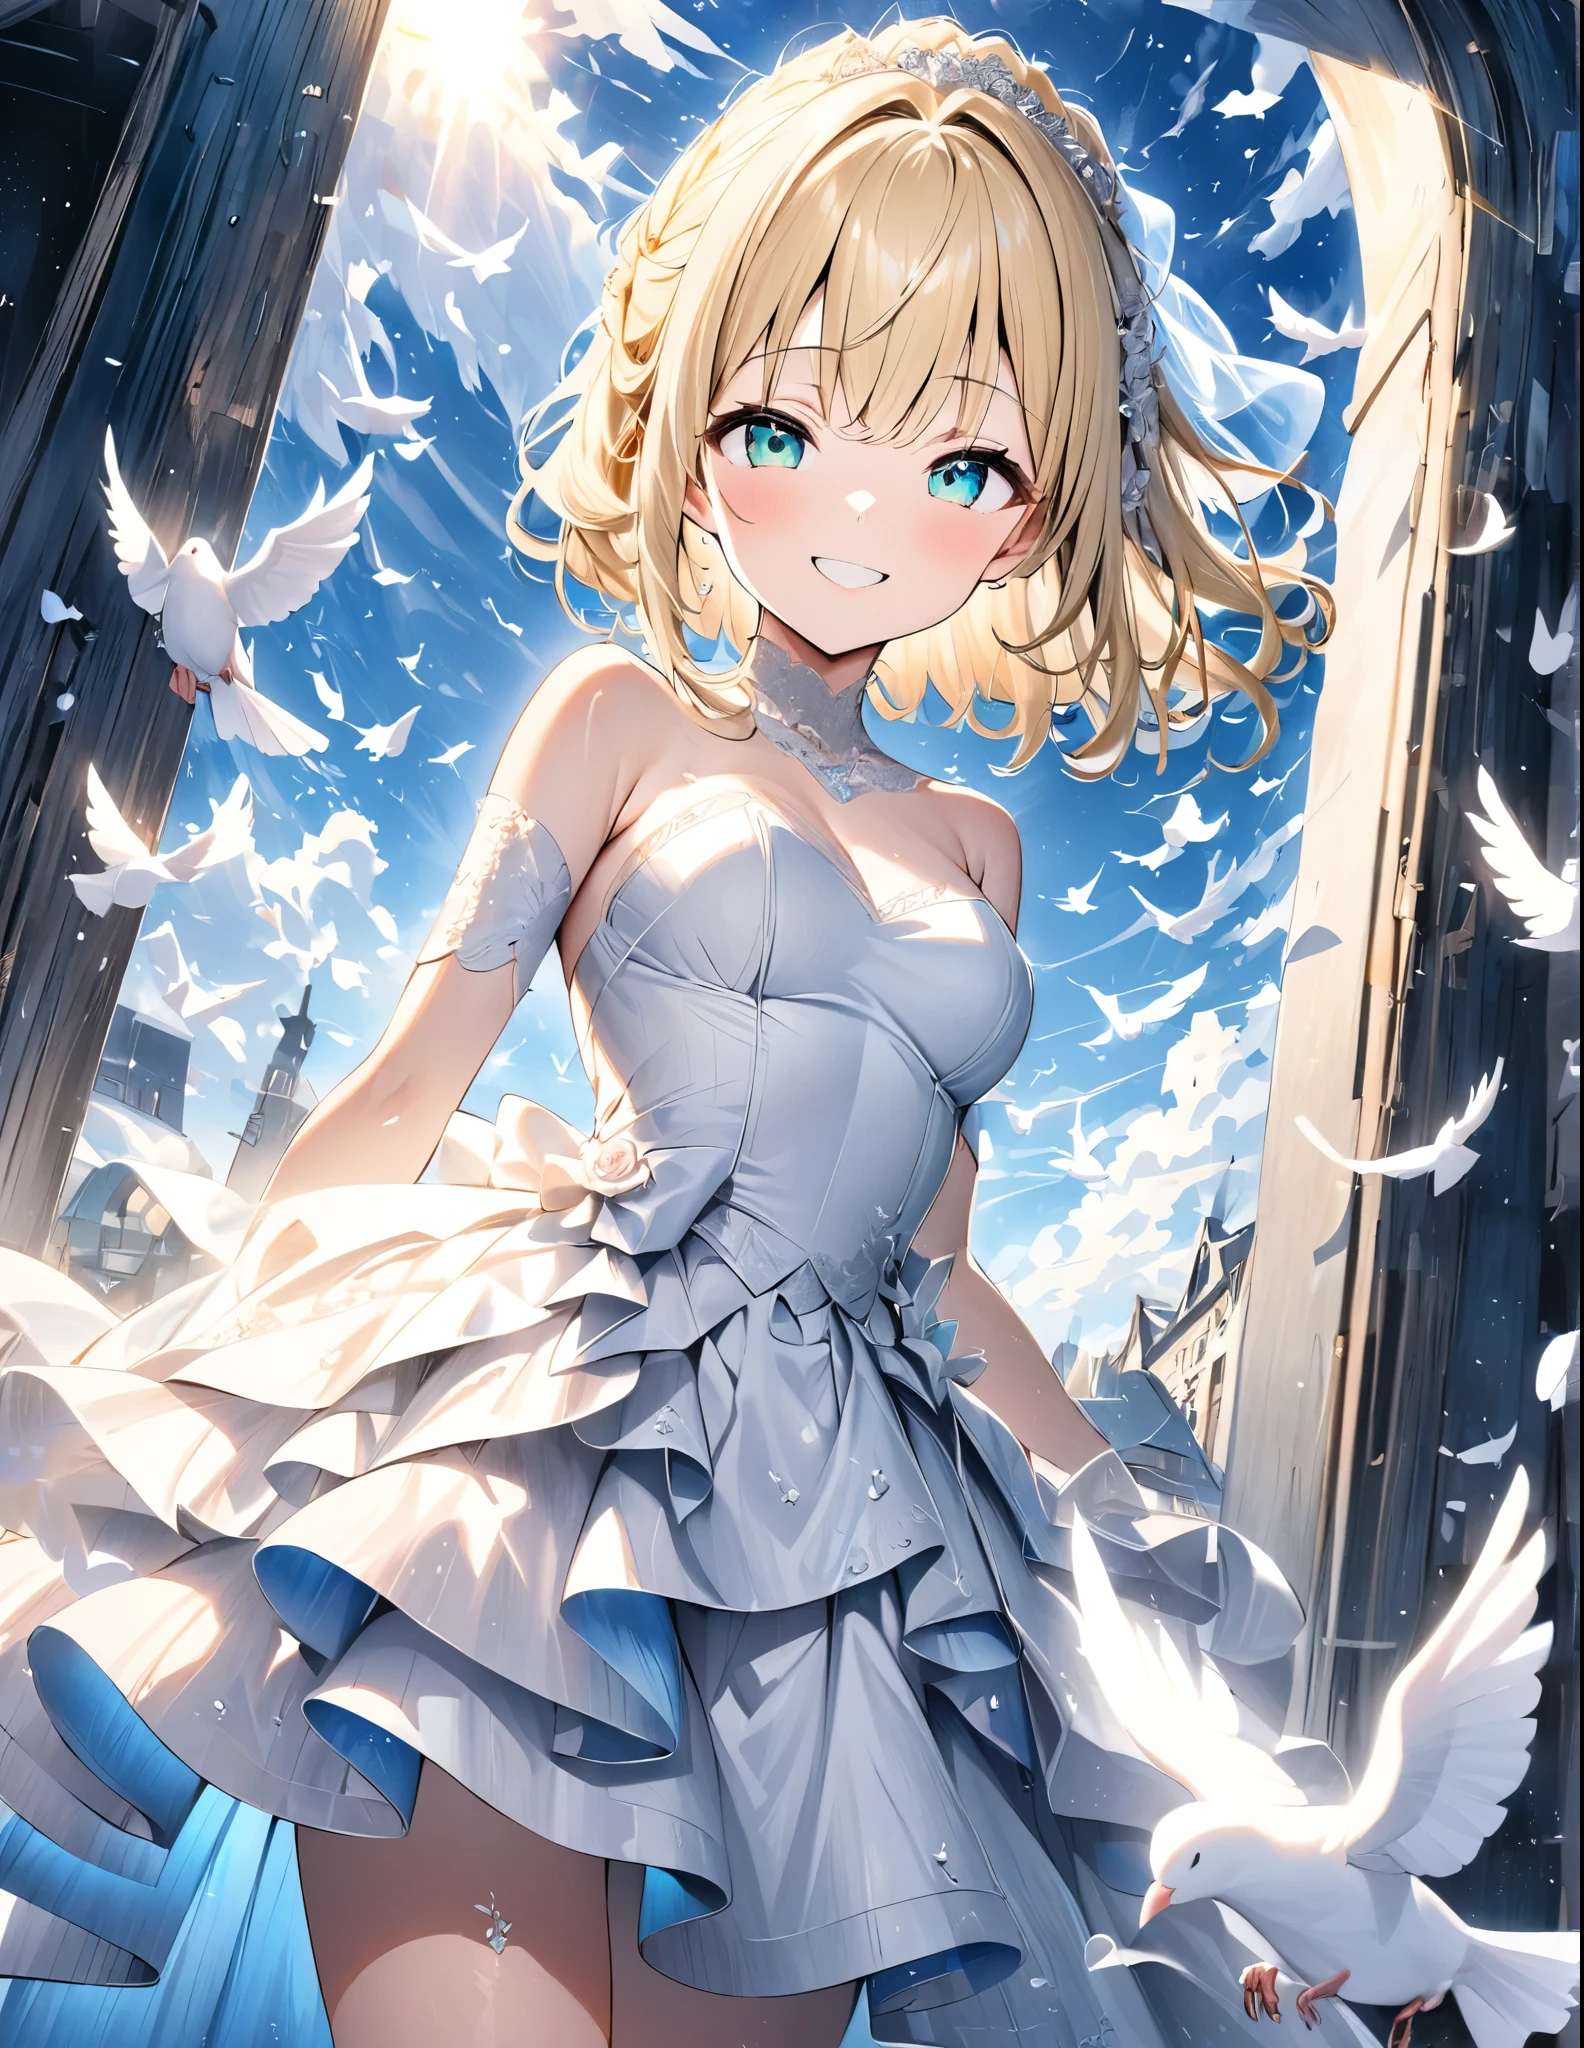 ((style:Colored pencil,pale colour))、(anime)、(masterpiece:1.2),atmospheric perspective,lens flare、White world。Light color、Wedding dress、Blonde、Emerald Eyes、cute、Backlight、Smile、Under the clear blue sky、Countless white doves fly around、Reflection of light、Mysterious Works